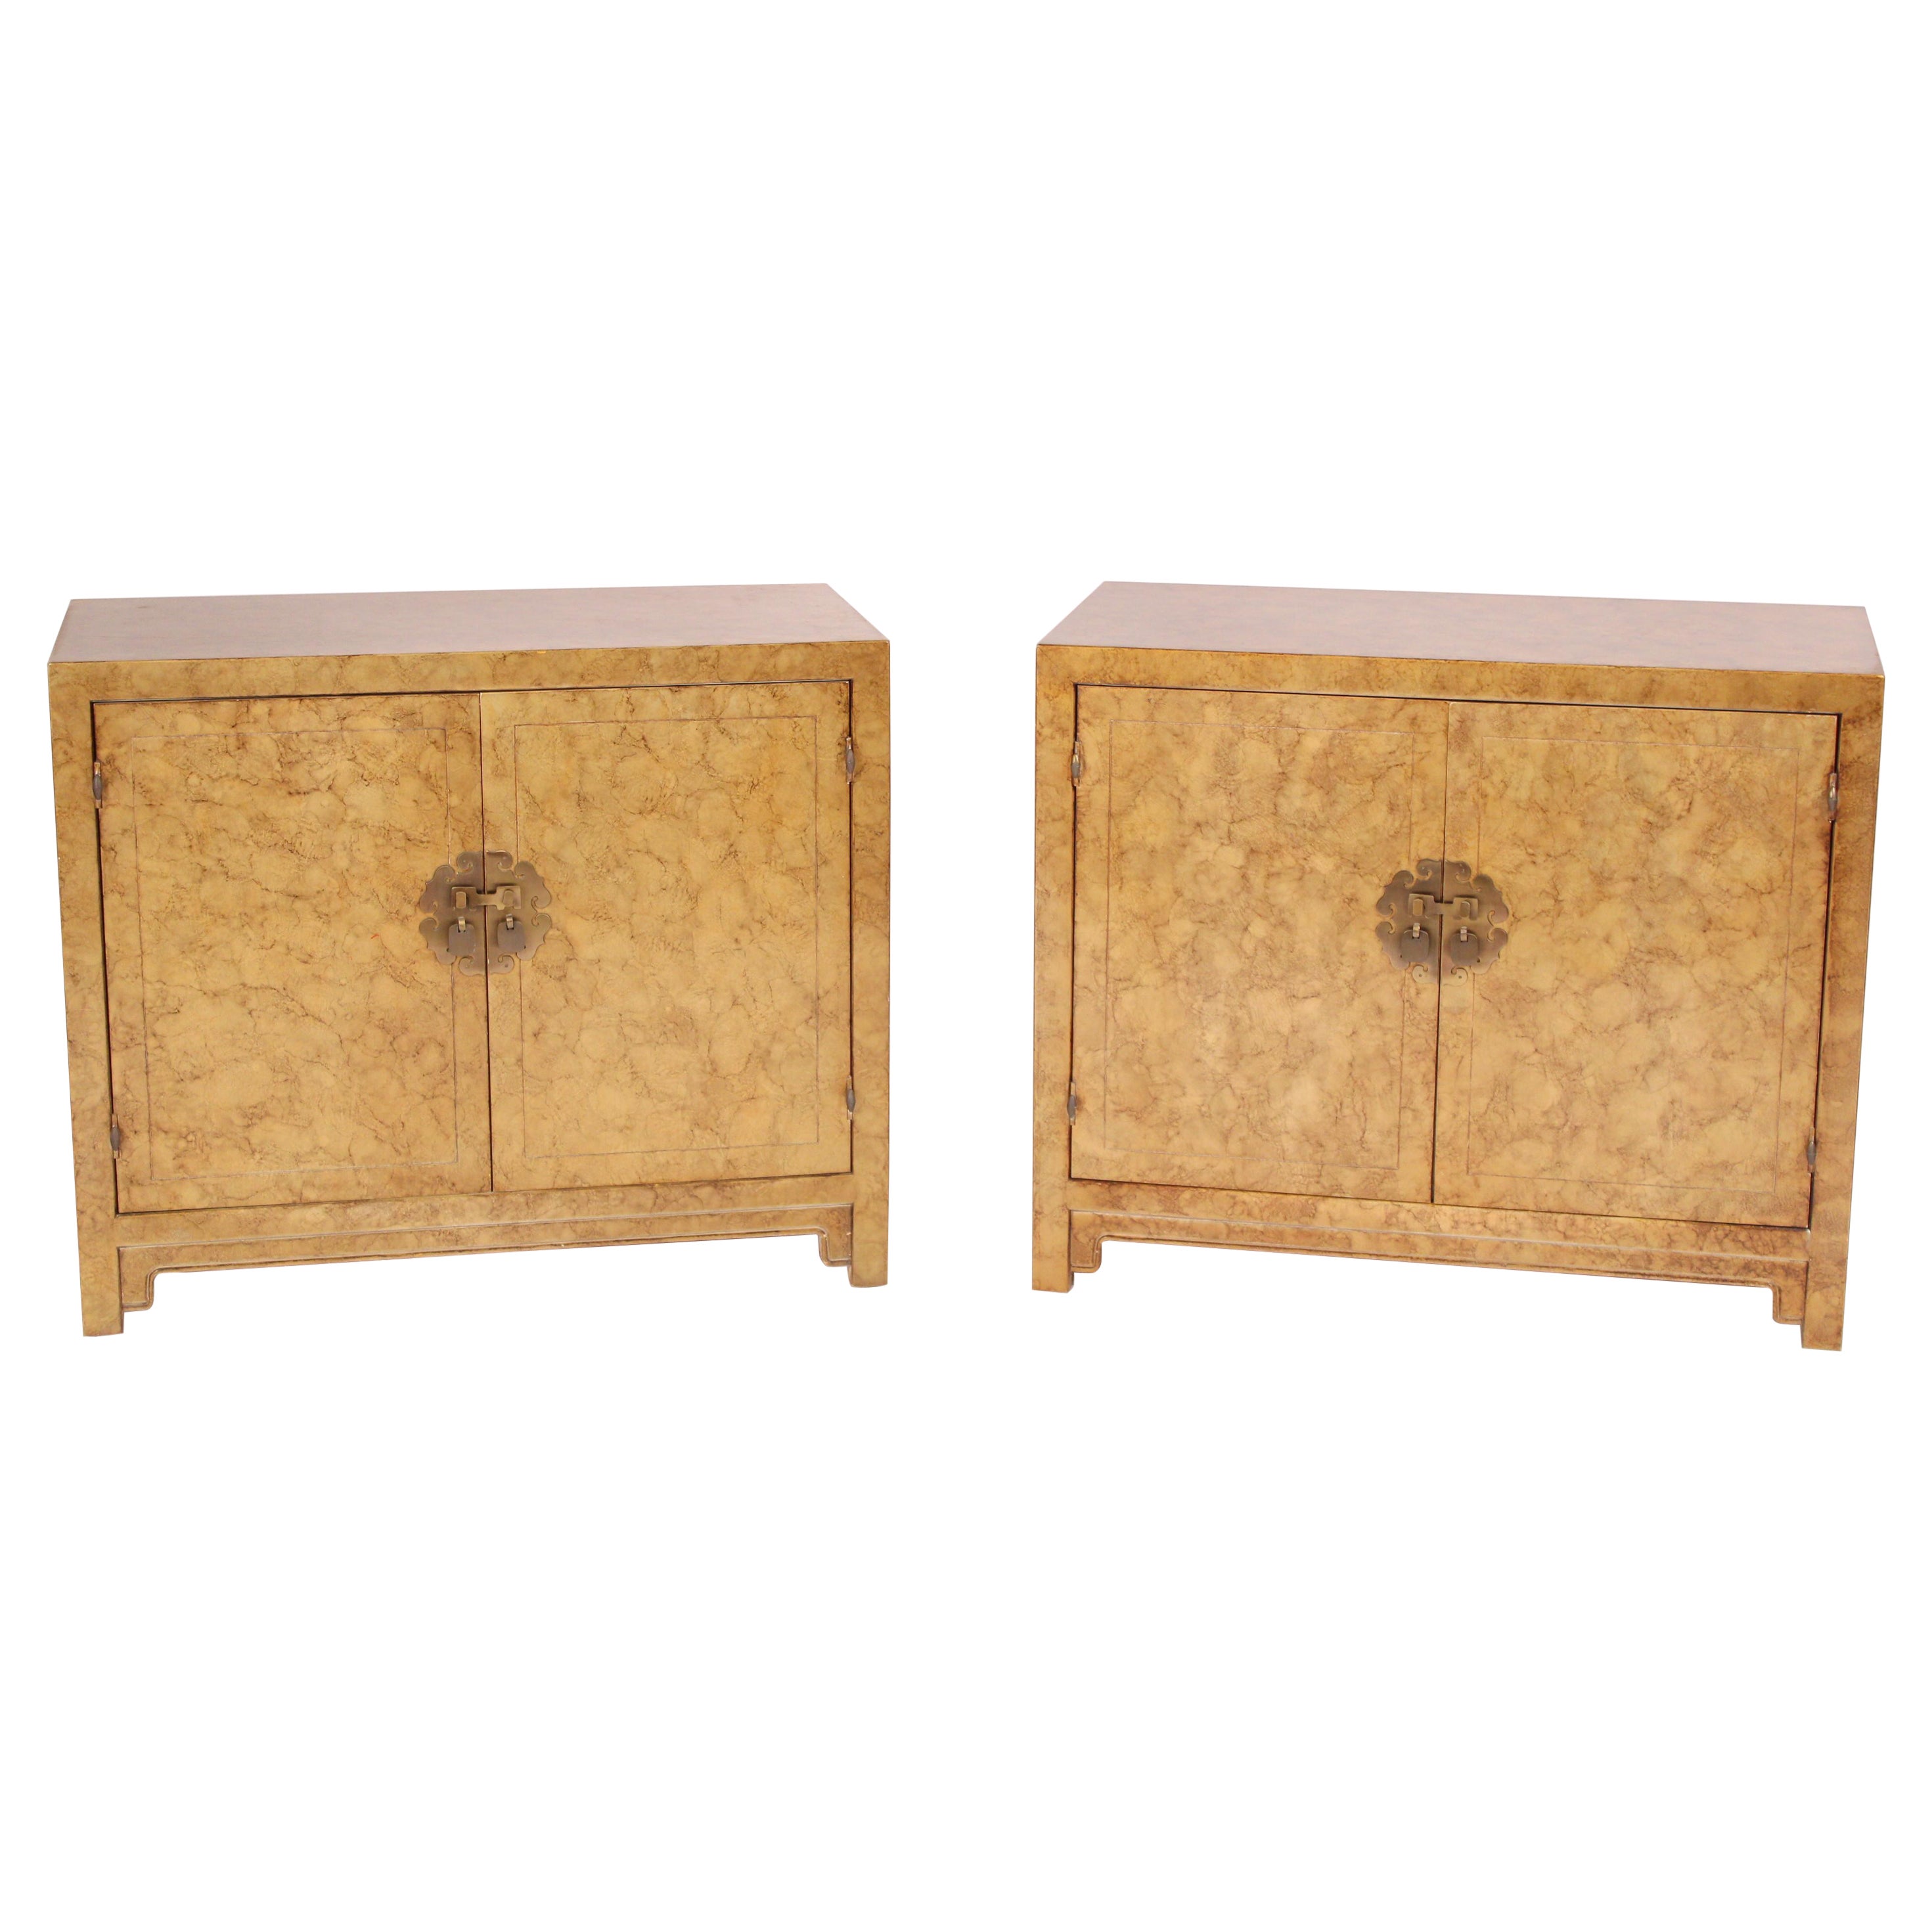 Pair of Henredon Faux Tortoise Decorated Two Door Cabinets